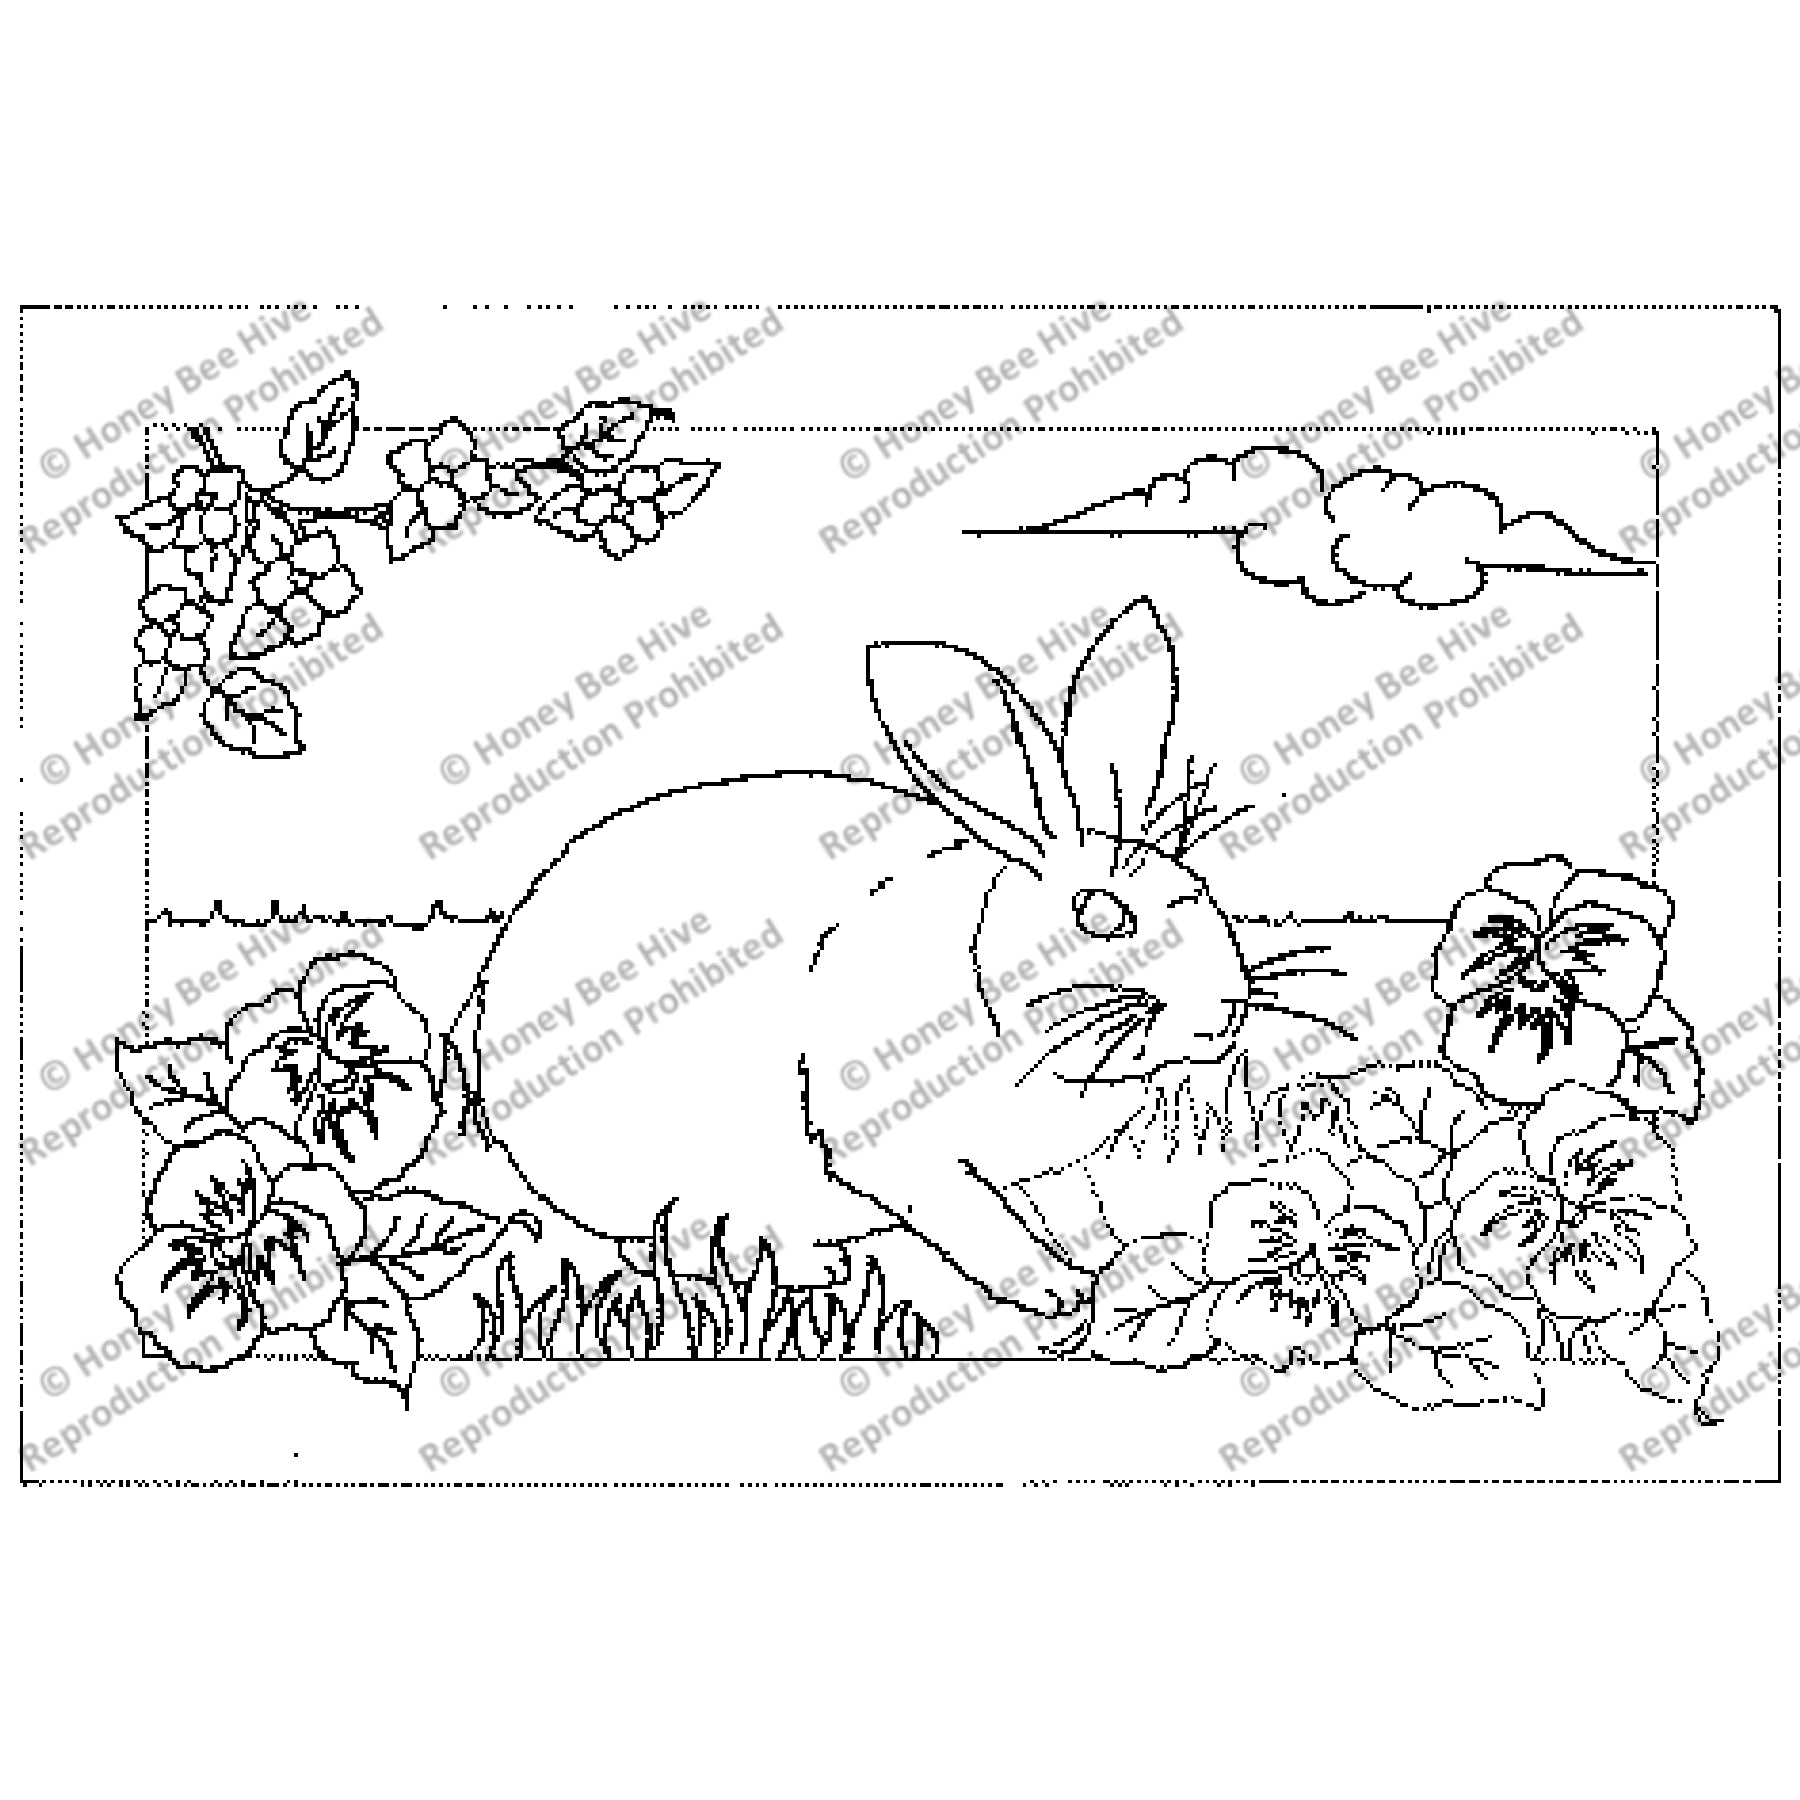 Bunny In A Pansy Patch, rug hooking pattern